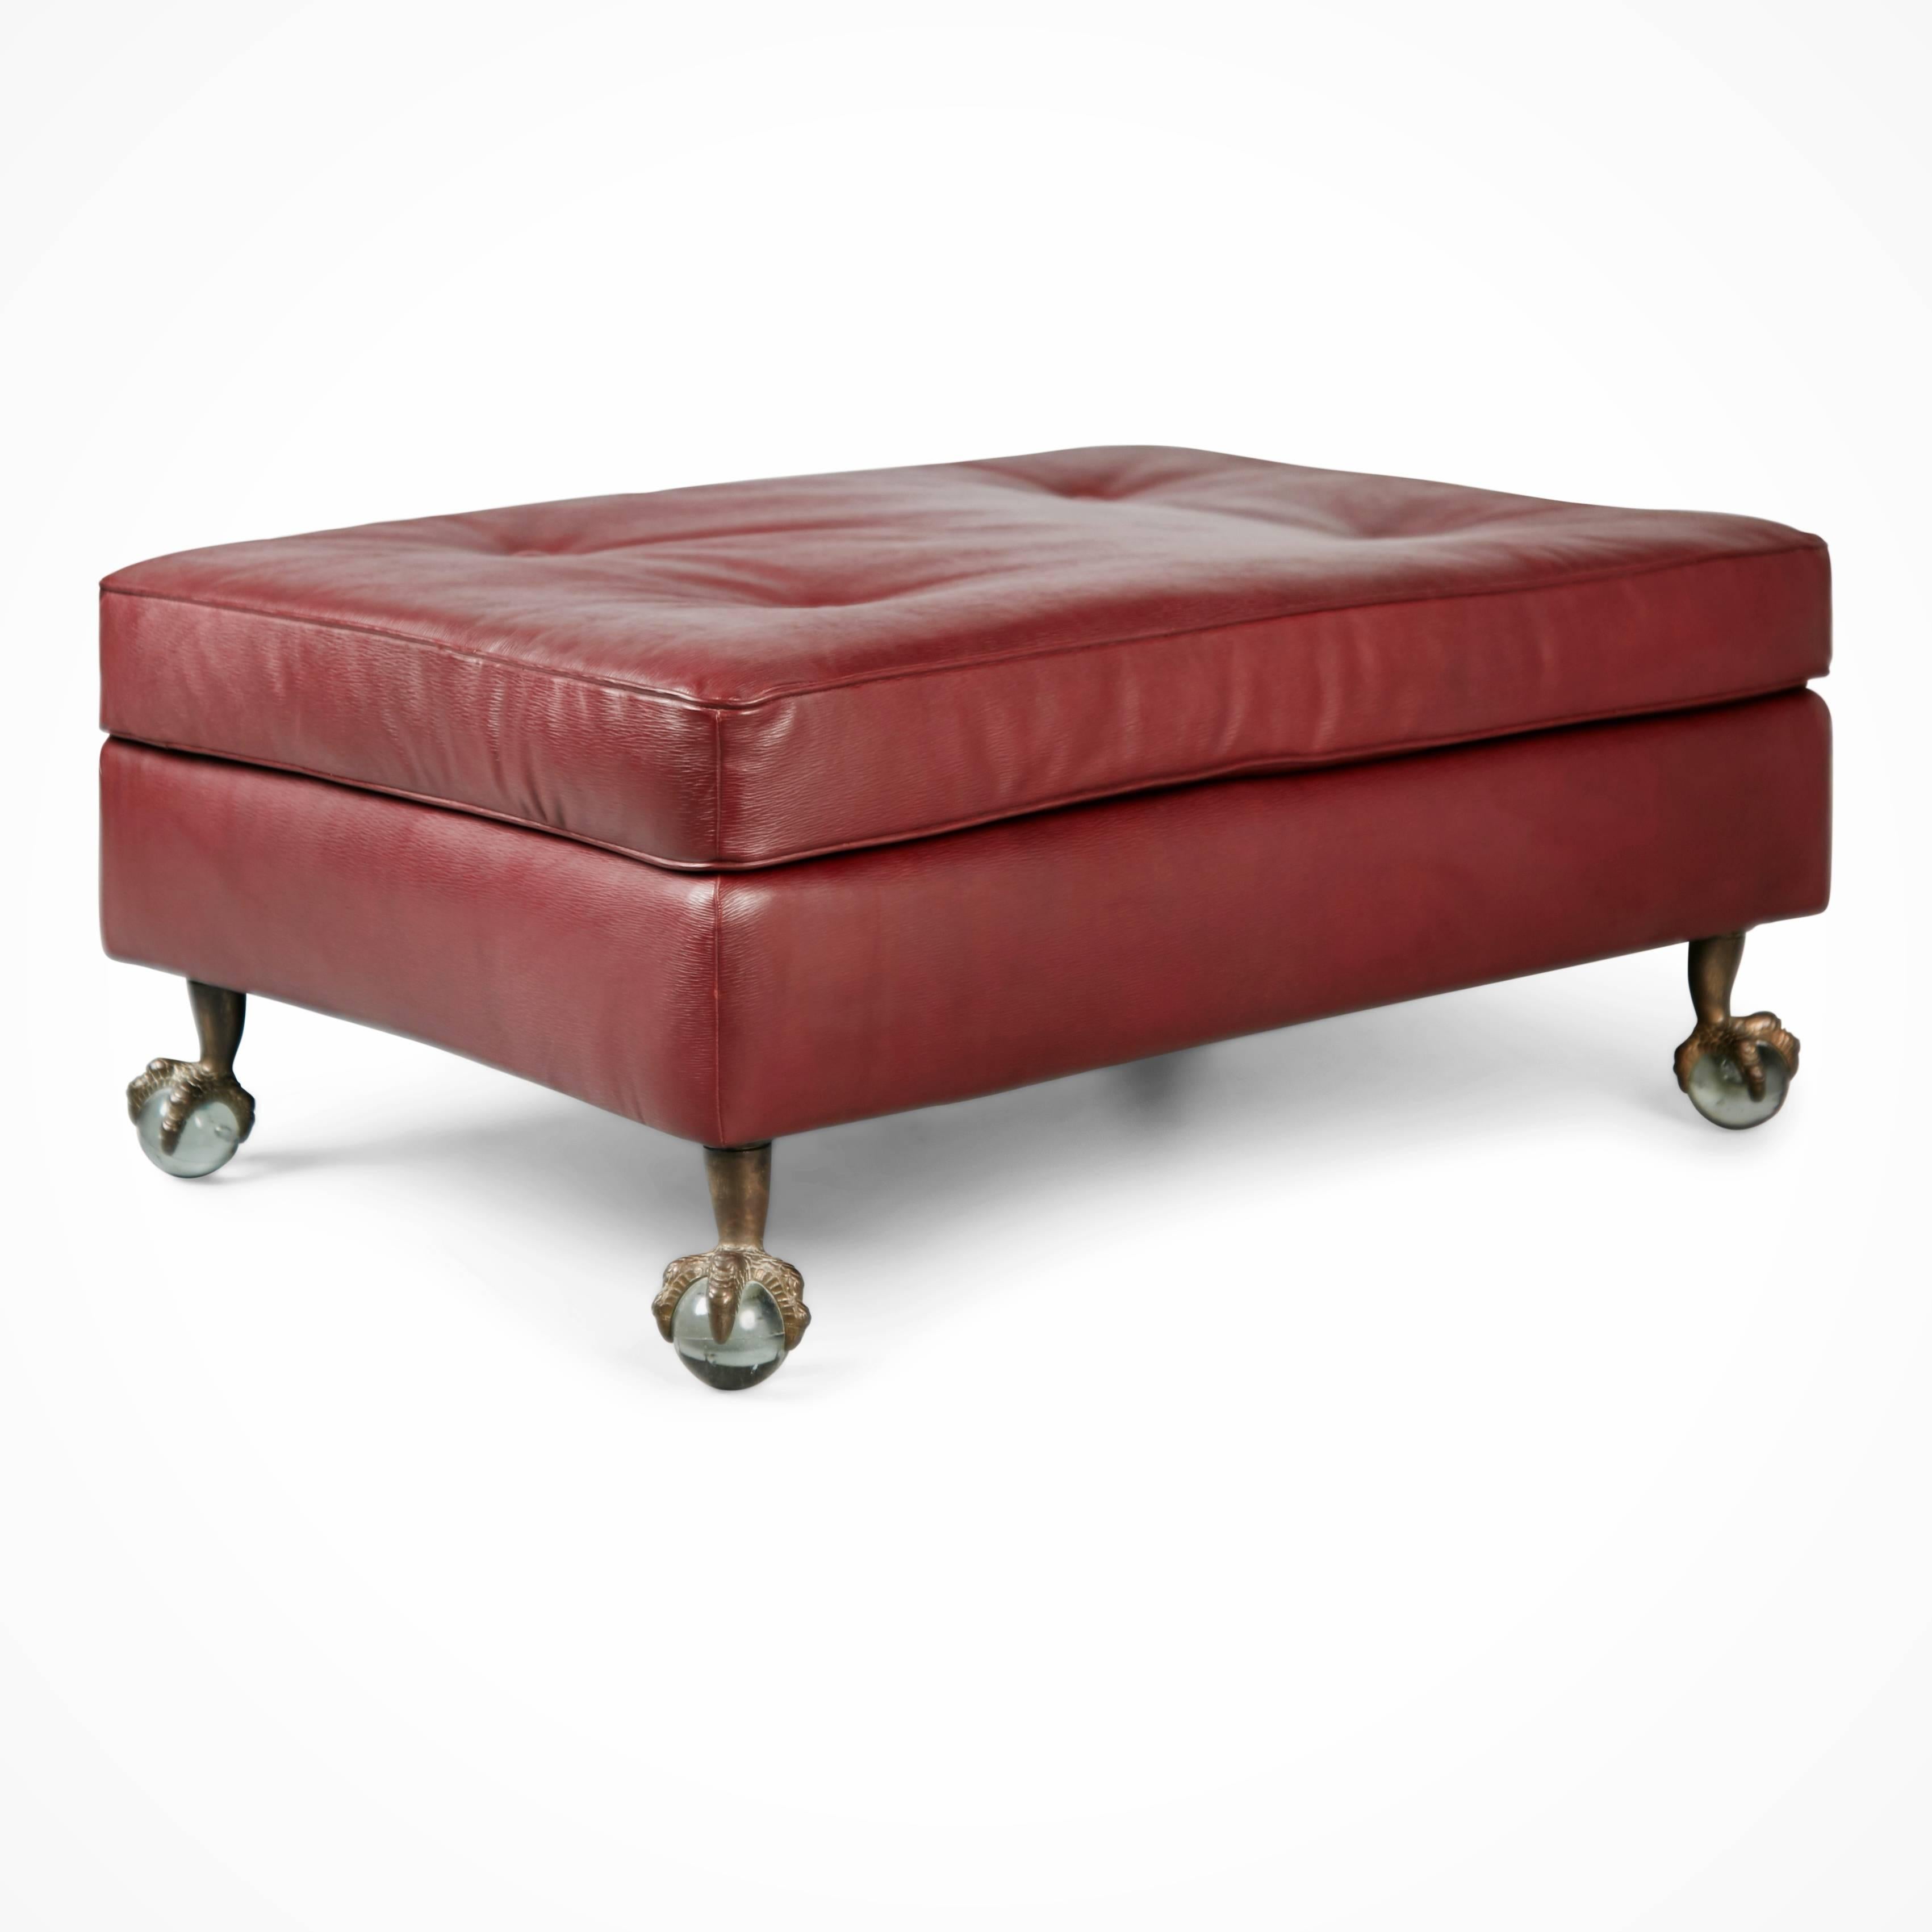 Classically designed tufted ottoman which has been upholstered in world-class Edelman Leather. This ottoman is upholstered in Edelman's Epi Leather 'Sulky' in the colorway Cabernet, a deep rich oxblood which displays a hand antiqued embossed